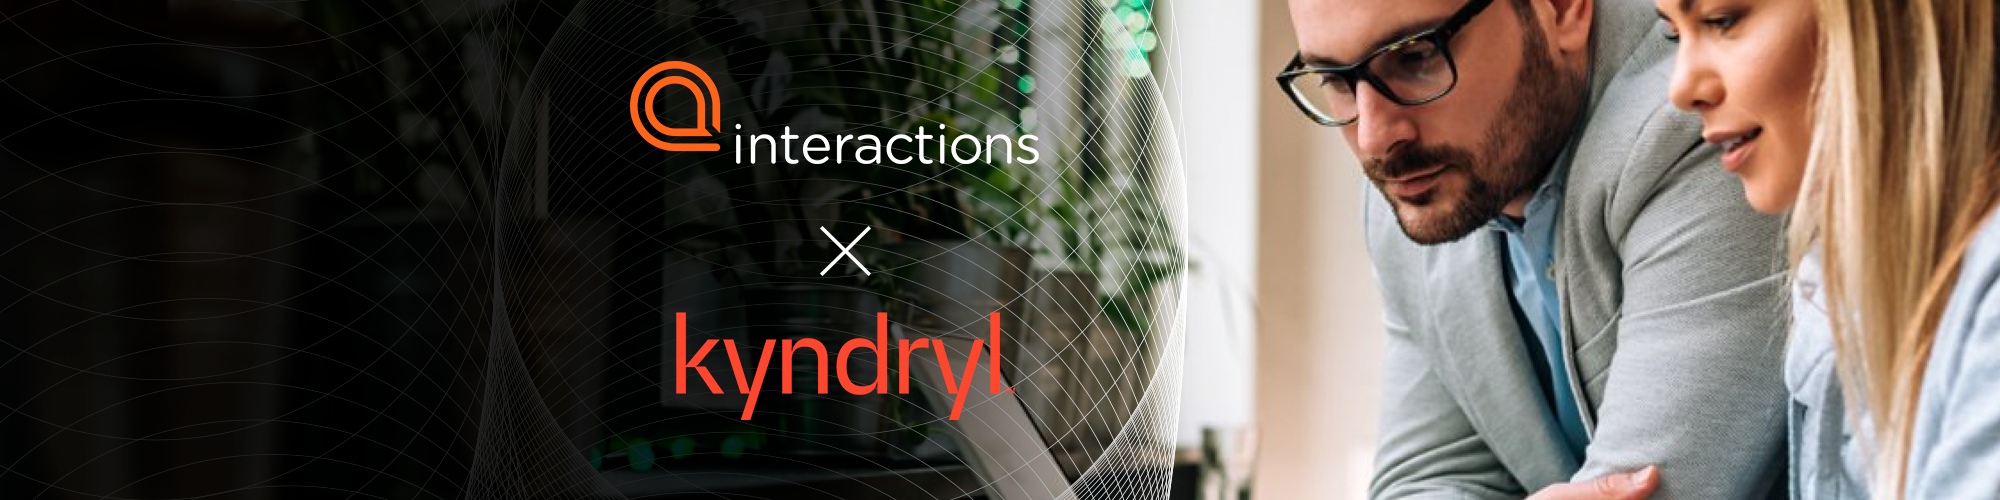 Interactions and Kyndryl Partner to Deliver Craveable IT Support Experiences